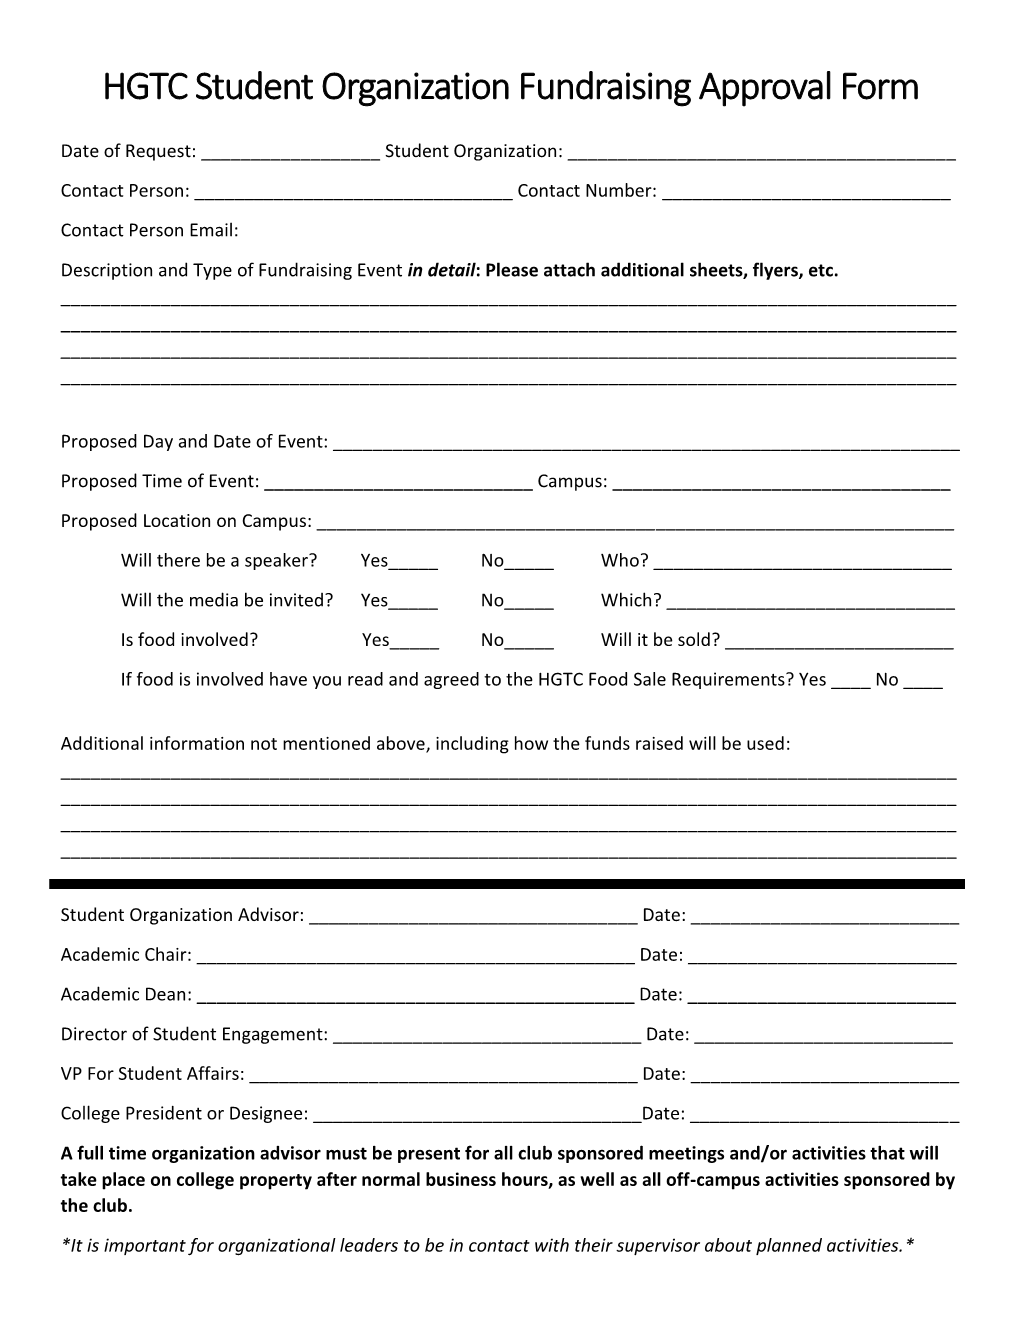 Fundraiser/Event Approval Form